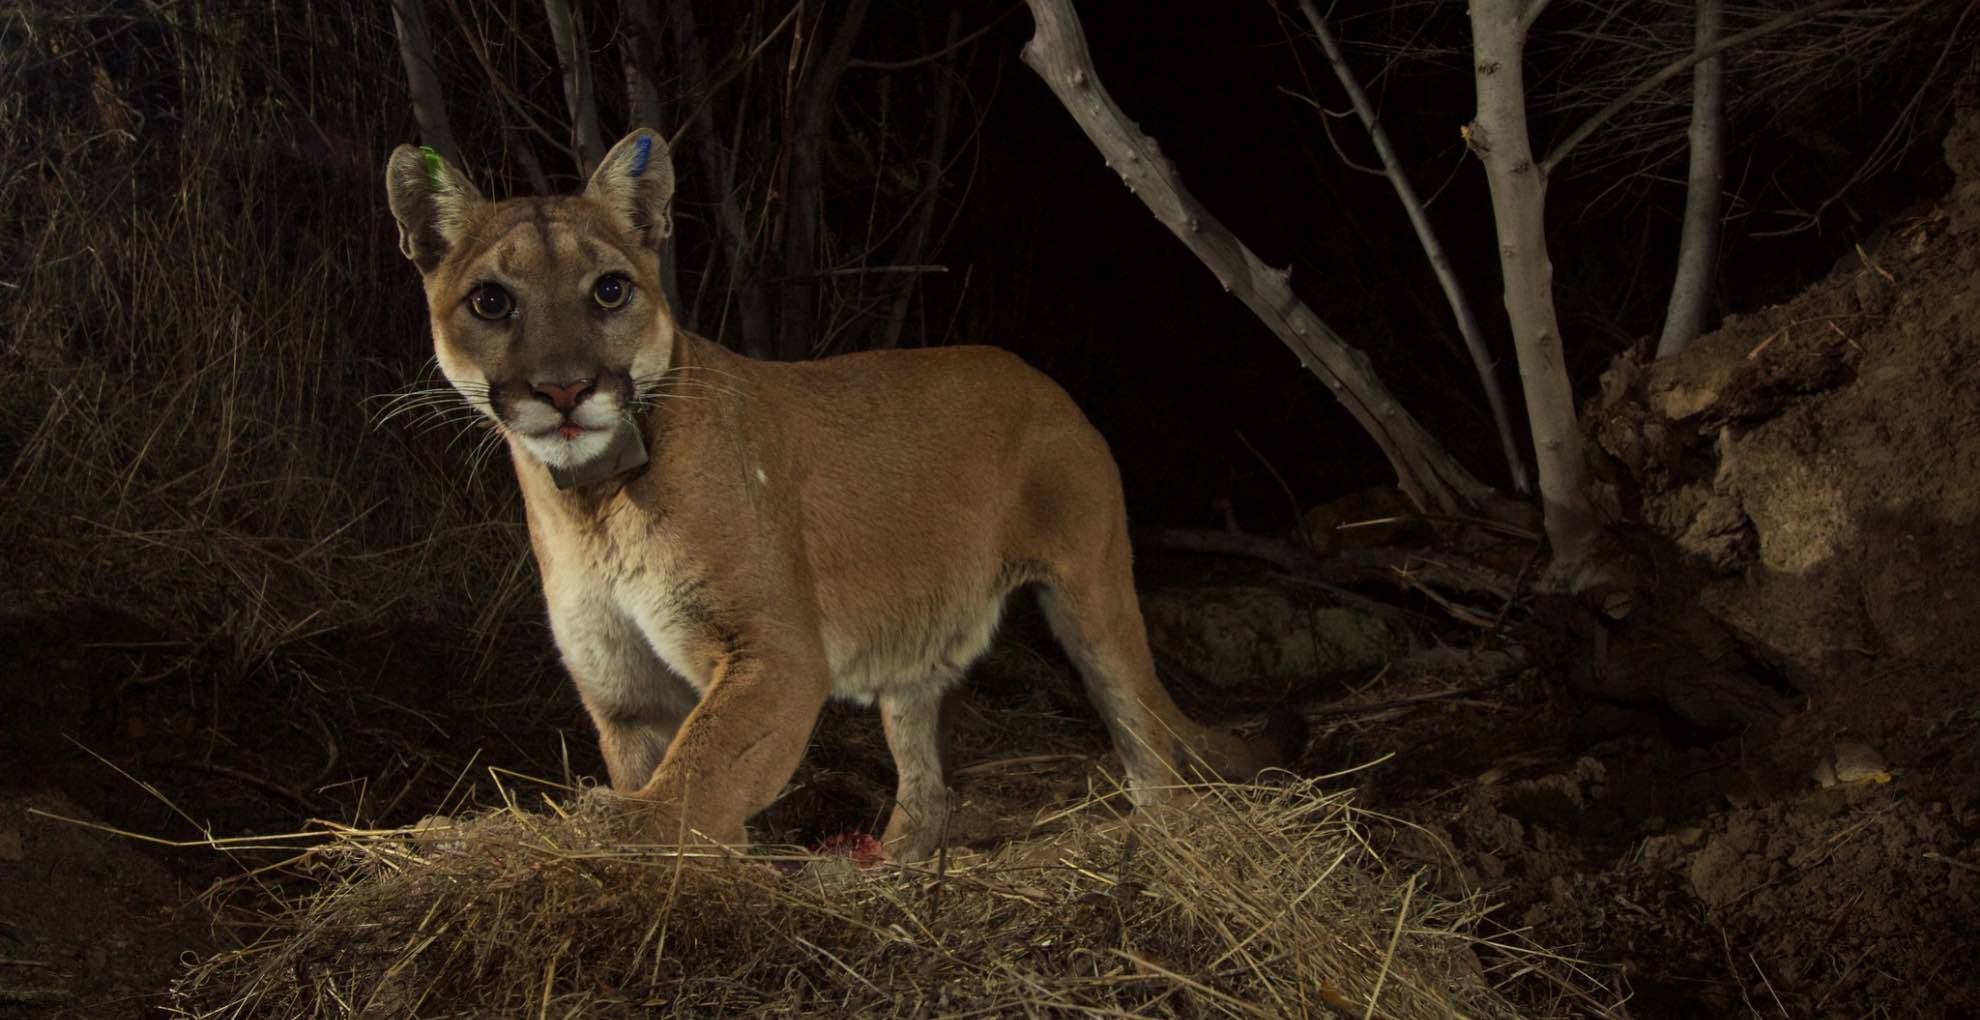 A mountain lion photographed at night in Los Angeles in 2015.